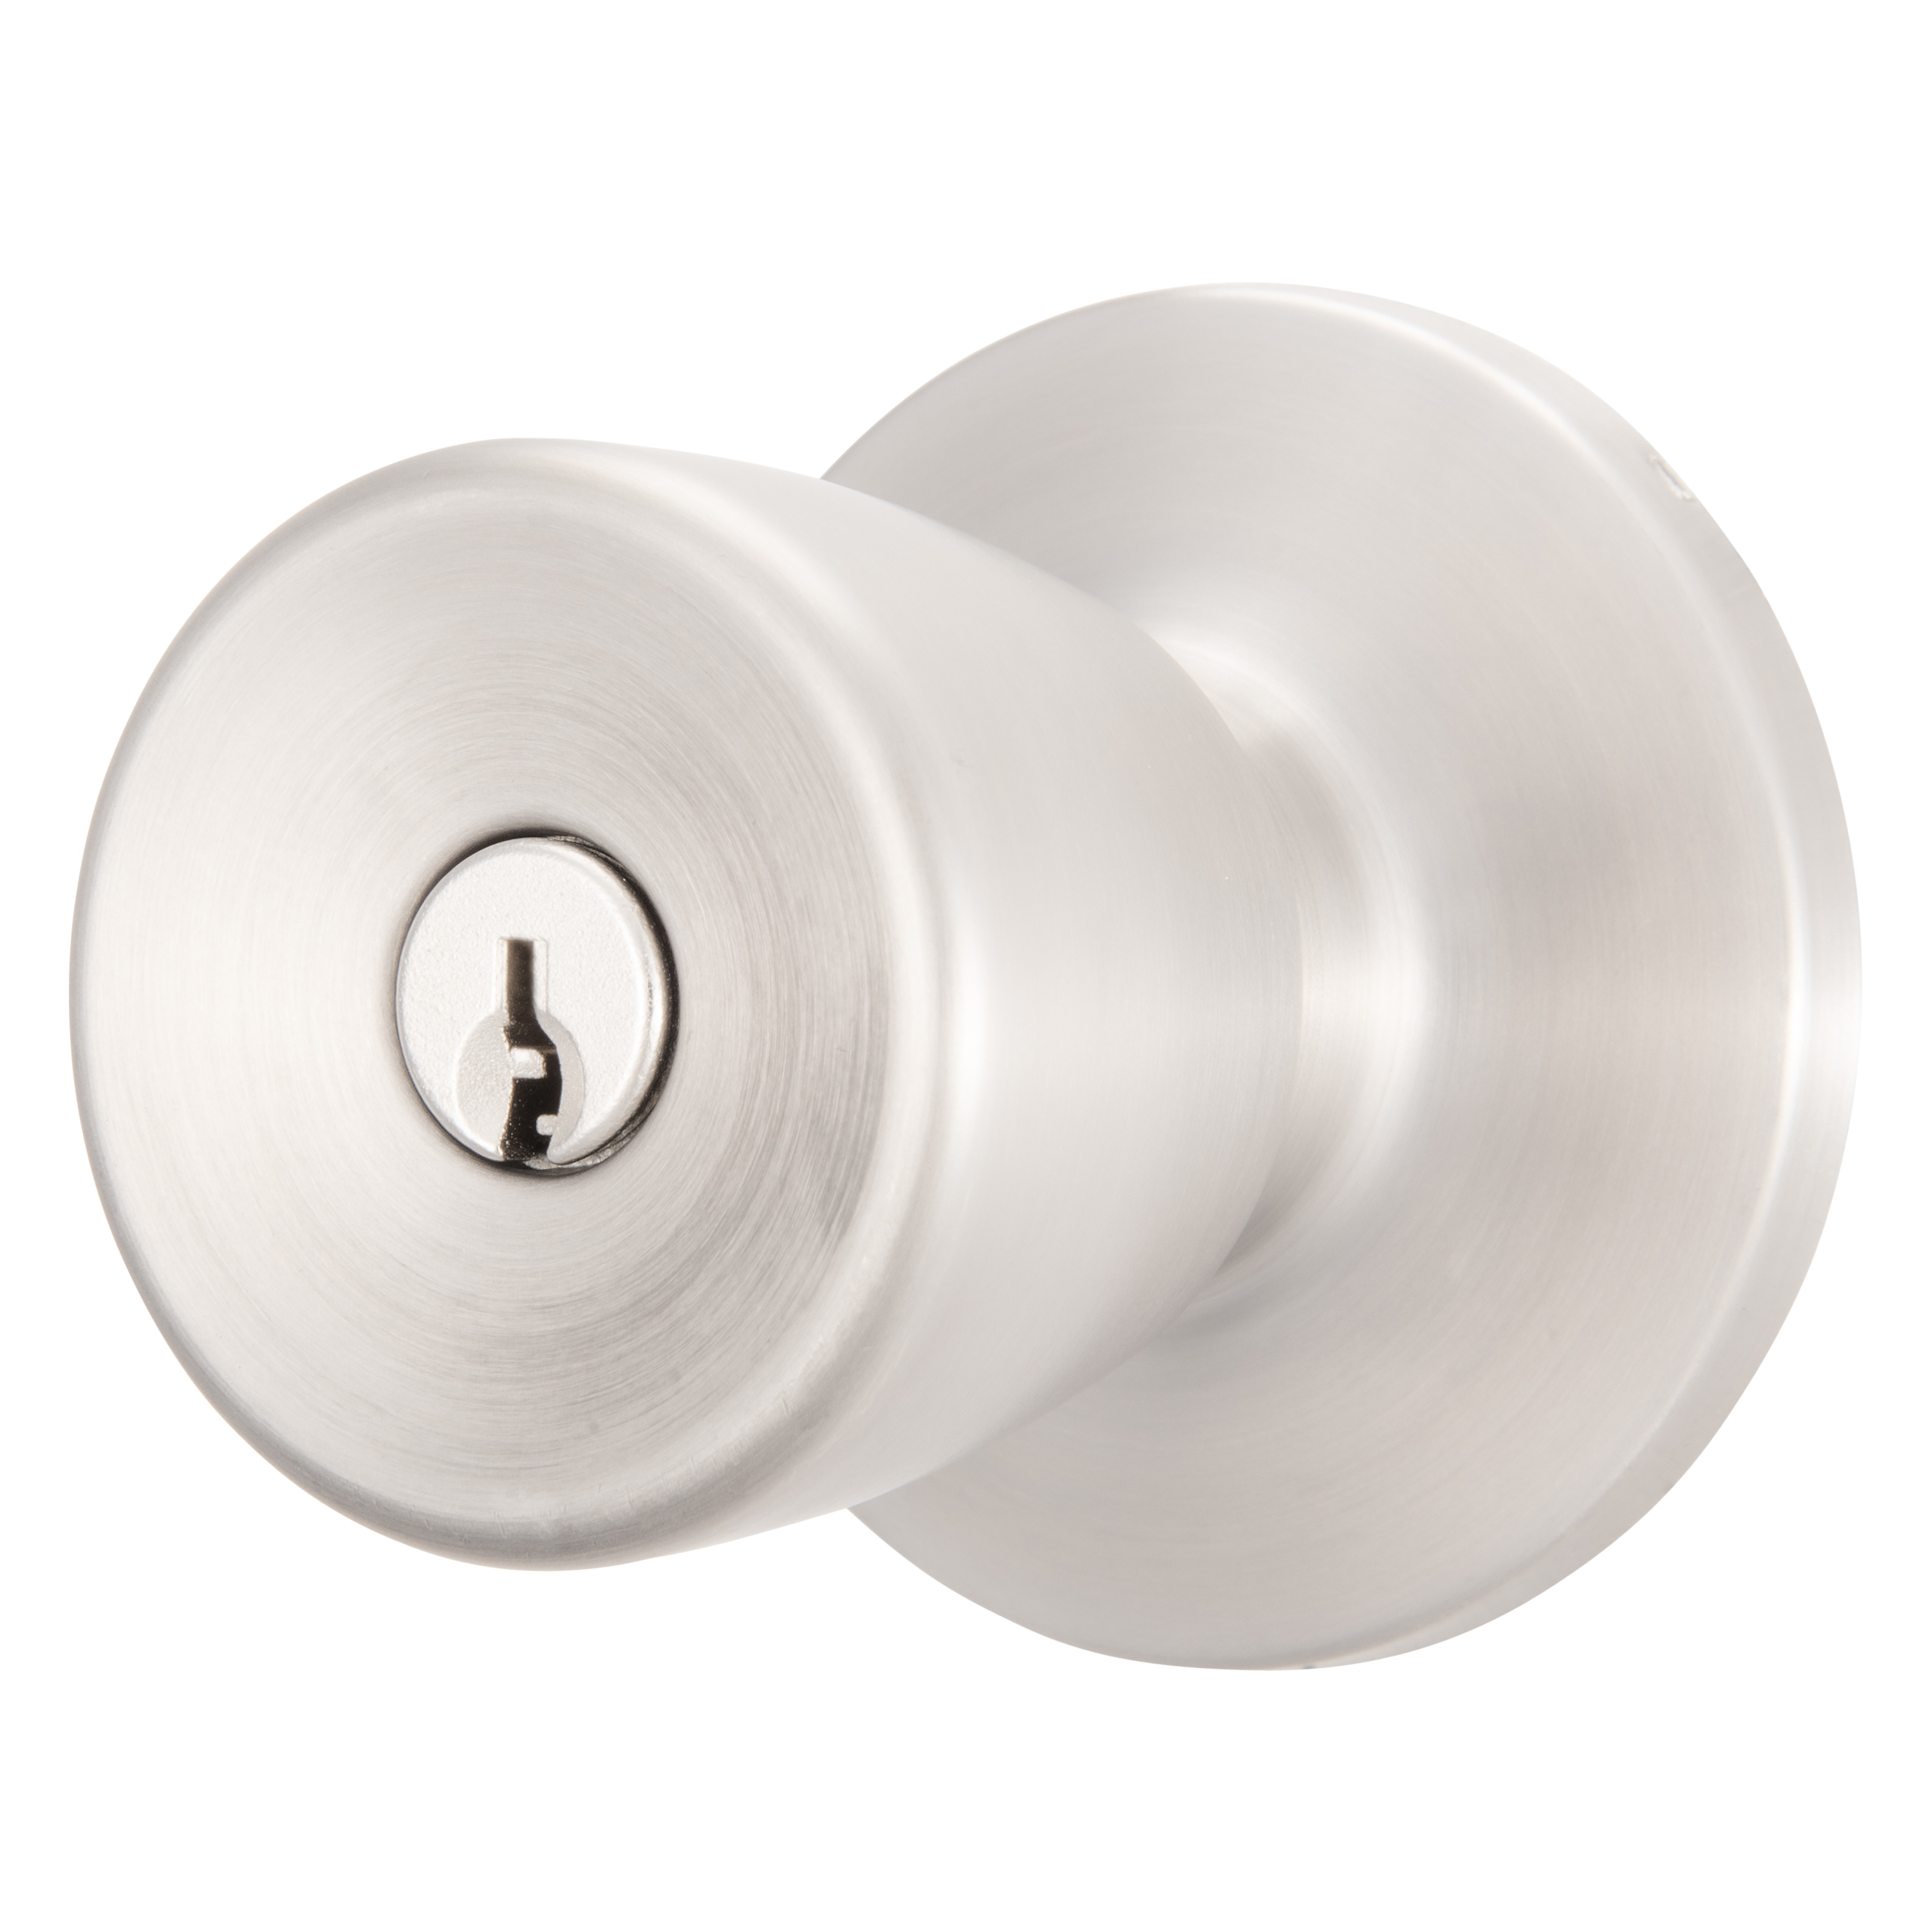 Brinks Mobile Home Keyed Entry Bell Style Doorknob, Stainless Steel Finish - image 1 of 10